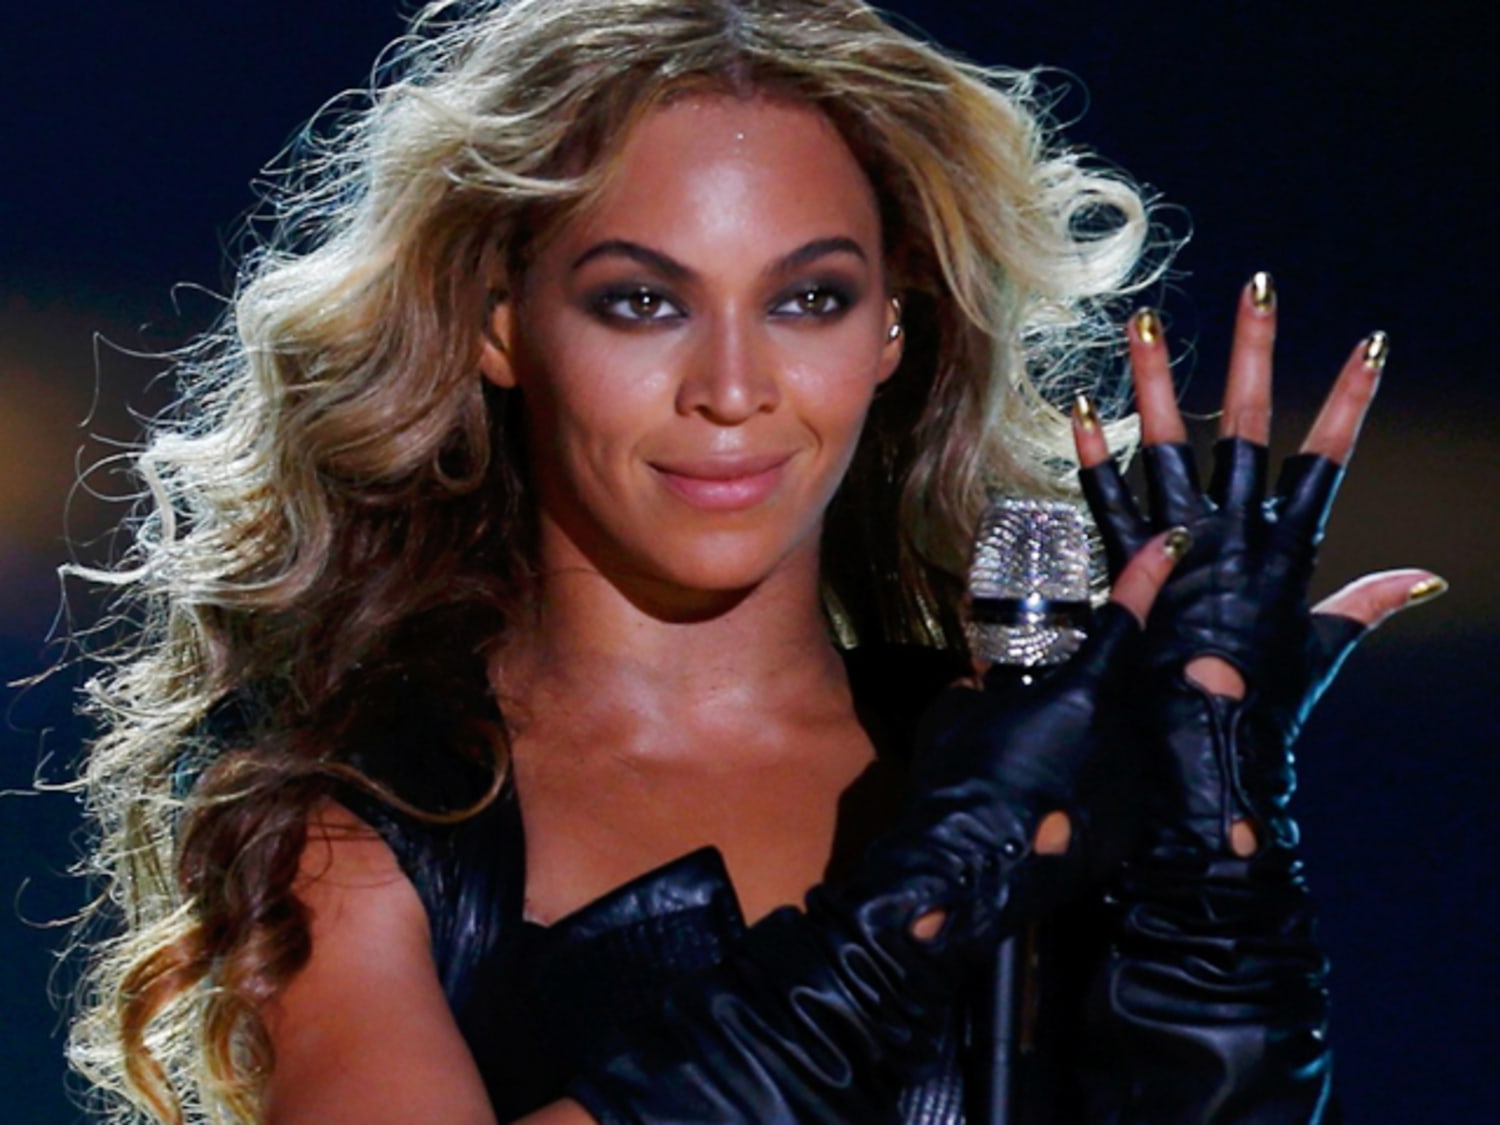 Beyonce's Super Bowl outfit ripped by PETA